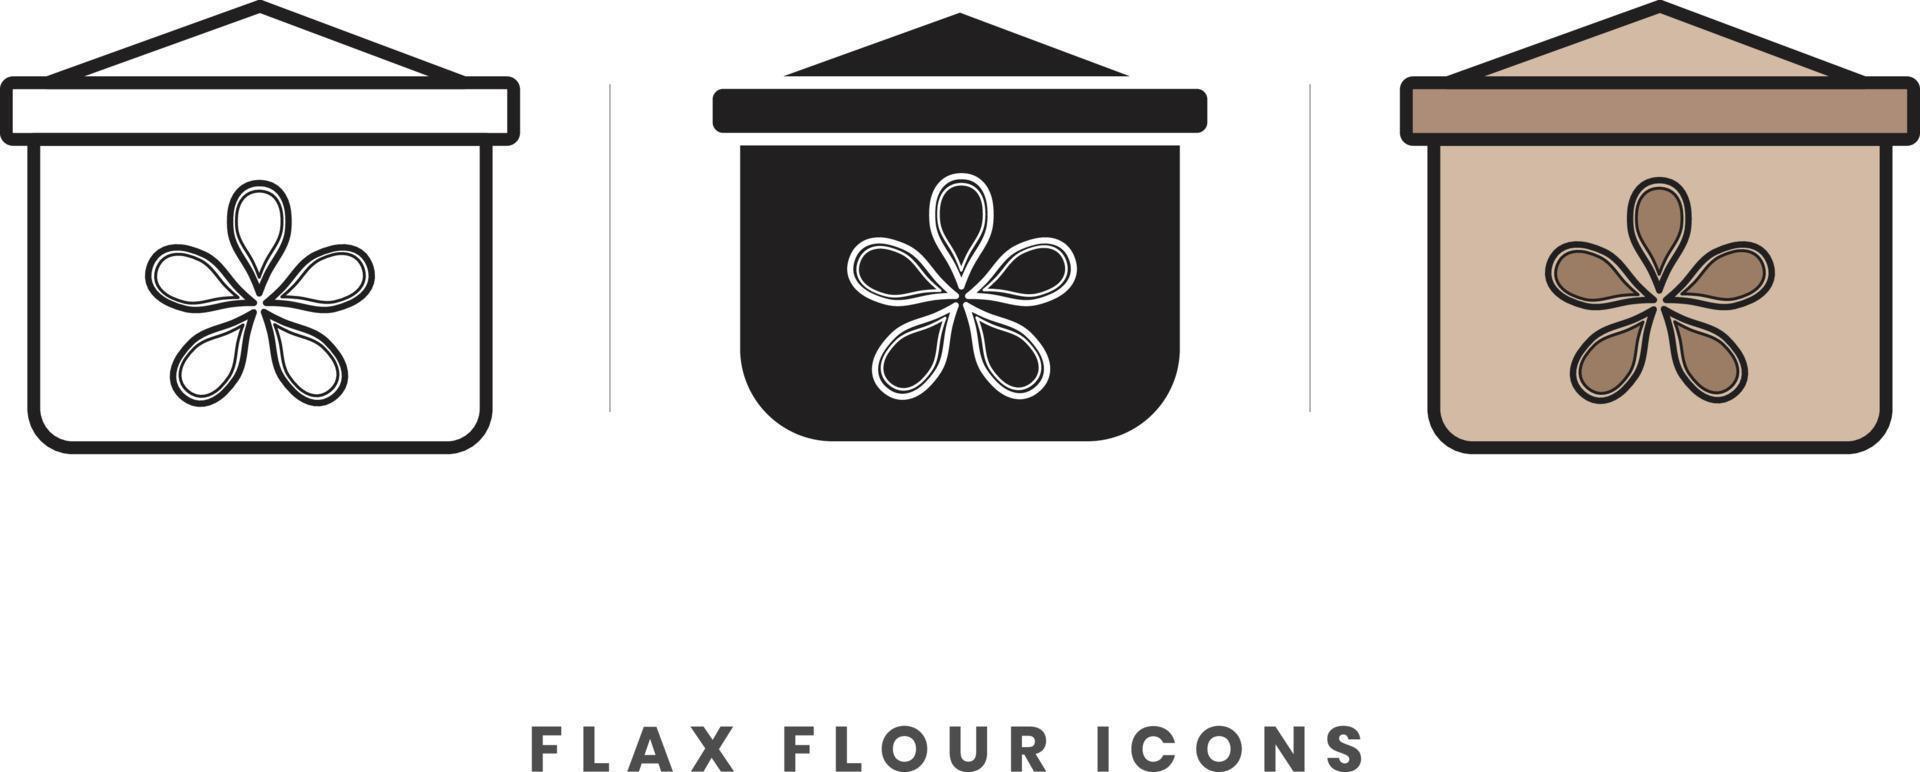 Flax flour icon. In lineart, outline, solid, colored styles. For wesite design, mobile app, software vector